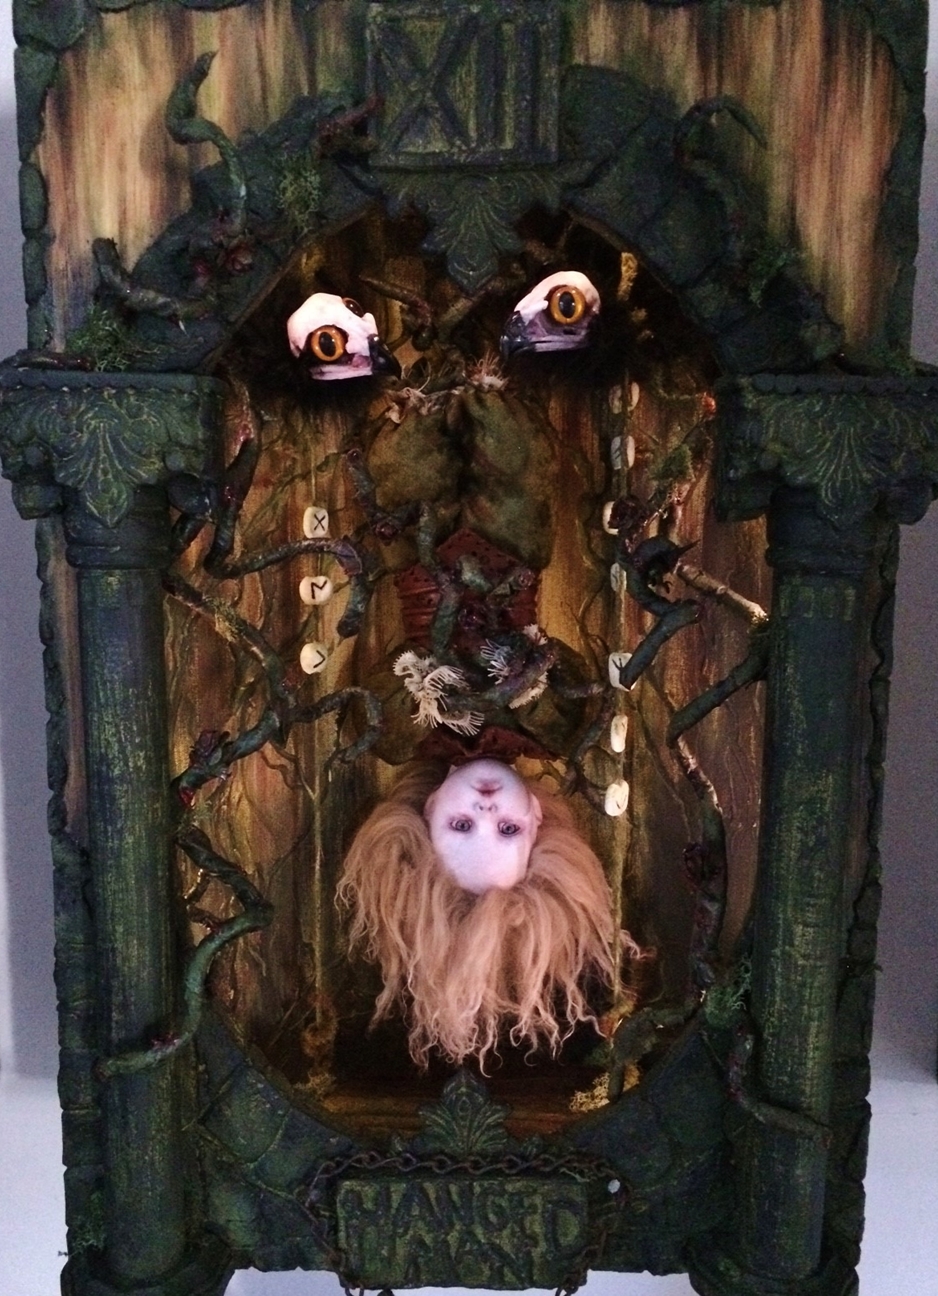 miniature shadowbox diorama with gothic artdoll hanging upside down in a forest setting two birds with skull heads above him